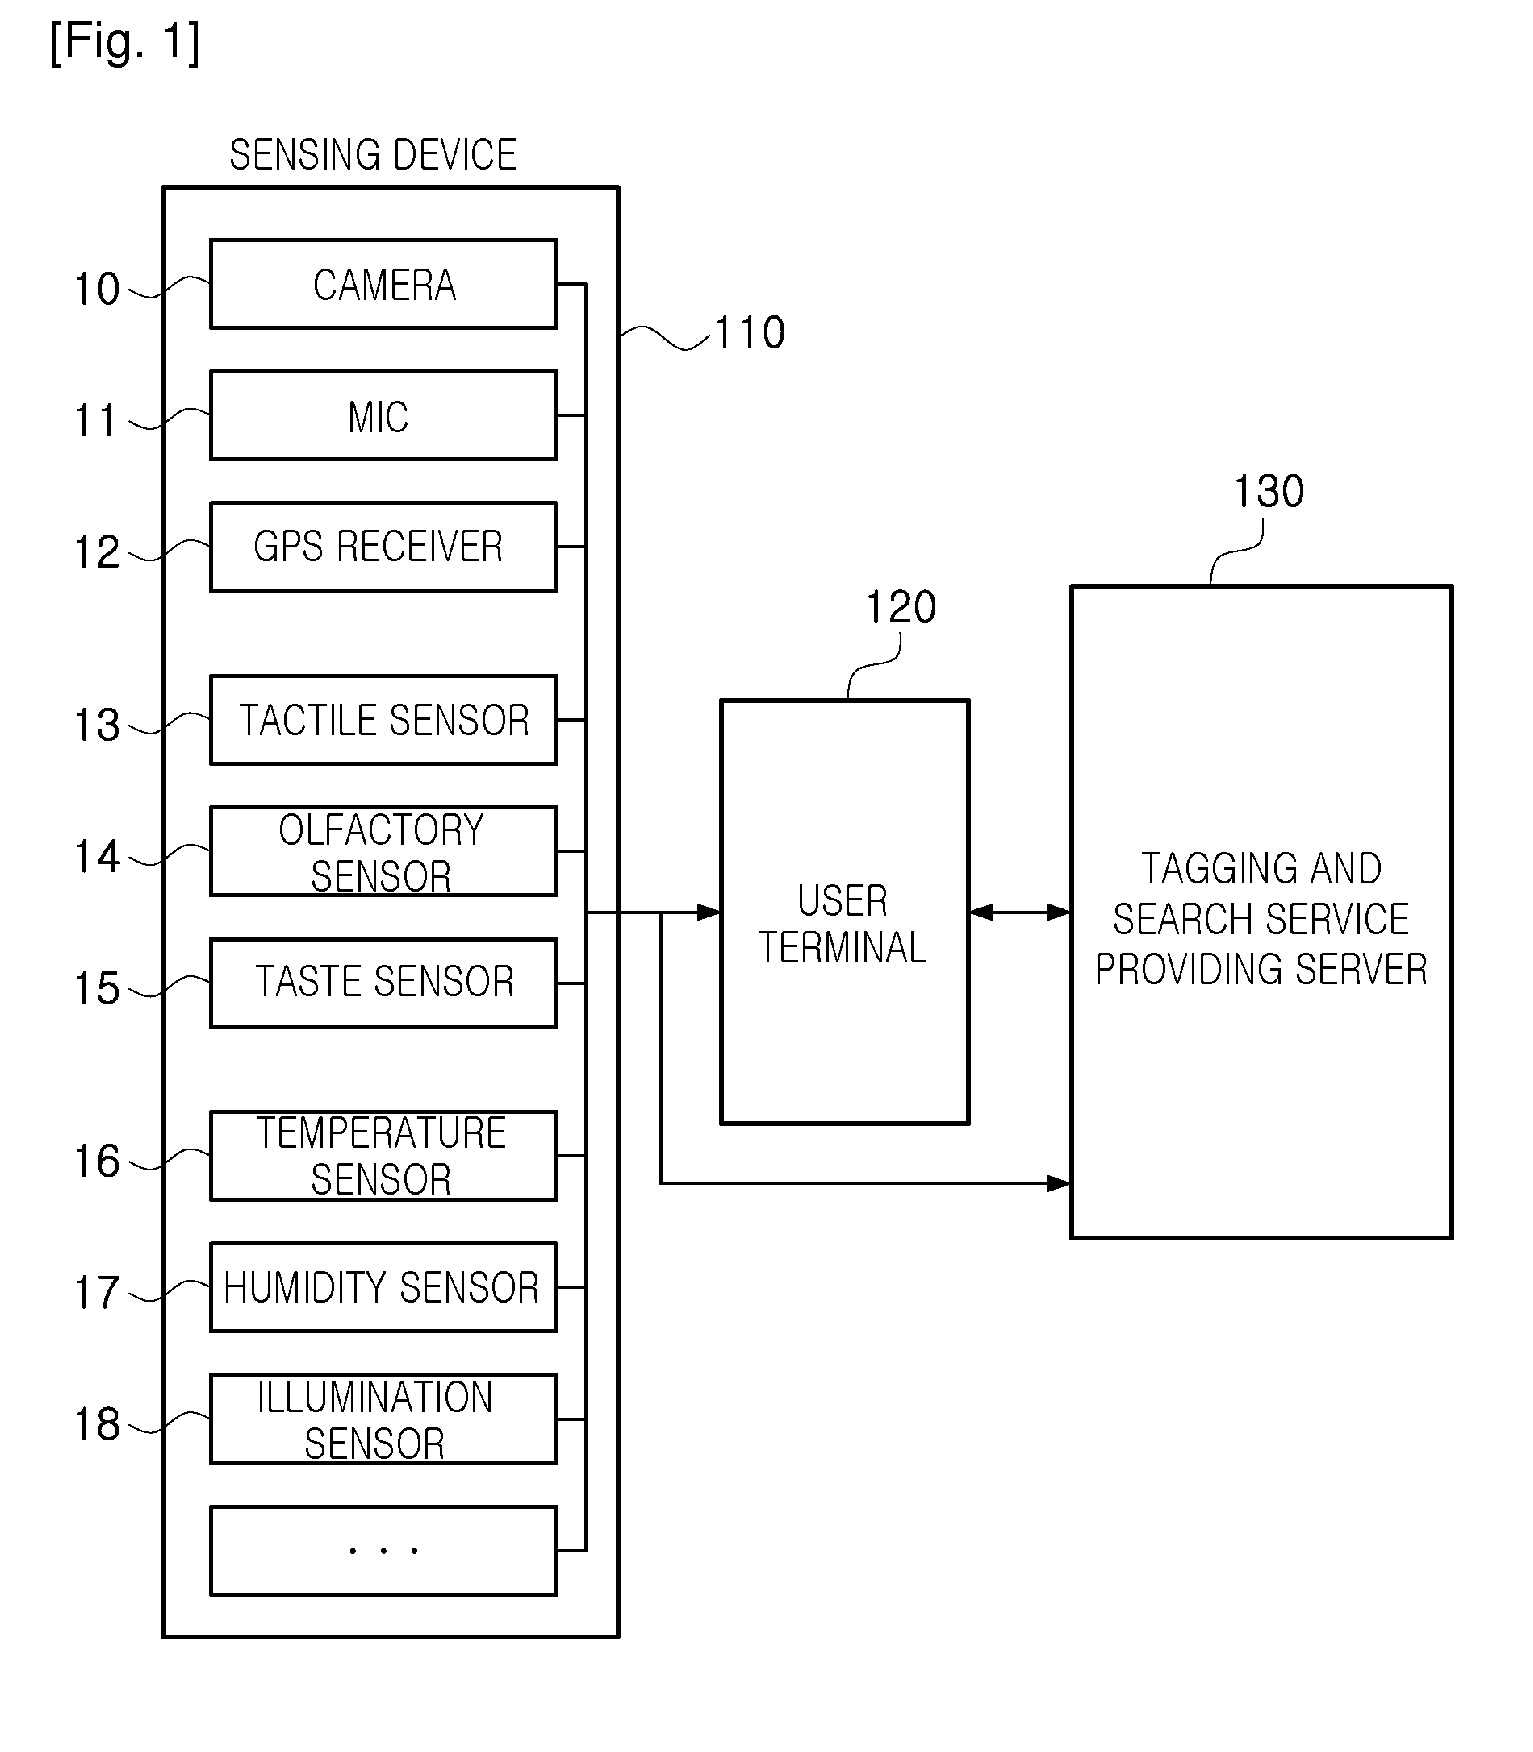 Digital data tagging apparatus, system and method for providing tagging and search service using sensory and environmental information